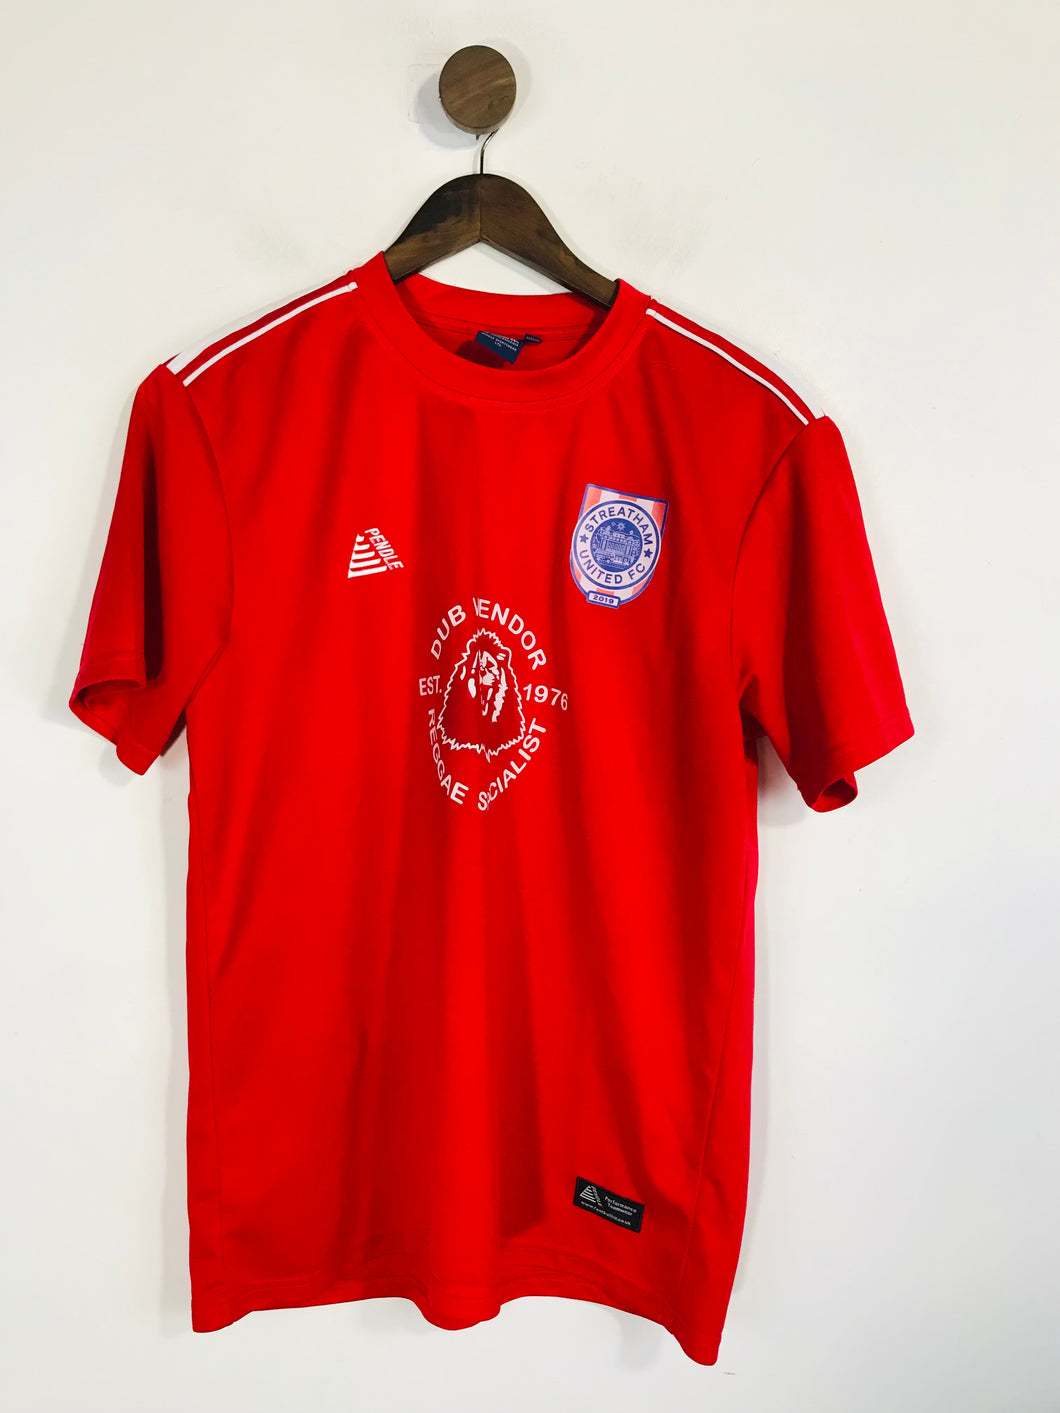 Streatham United FC Men's Football Sports Top | S | Red